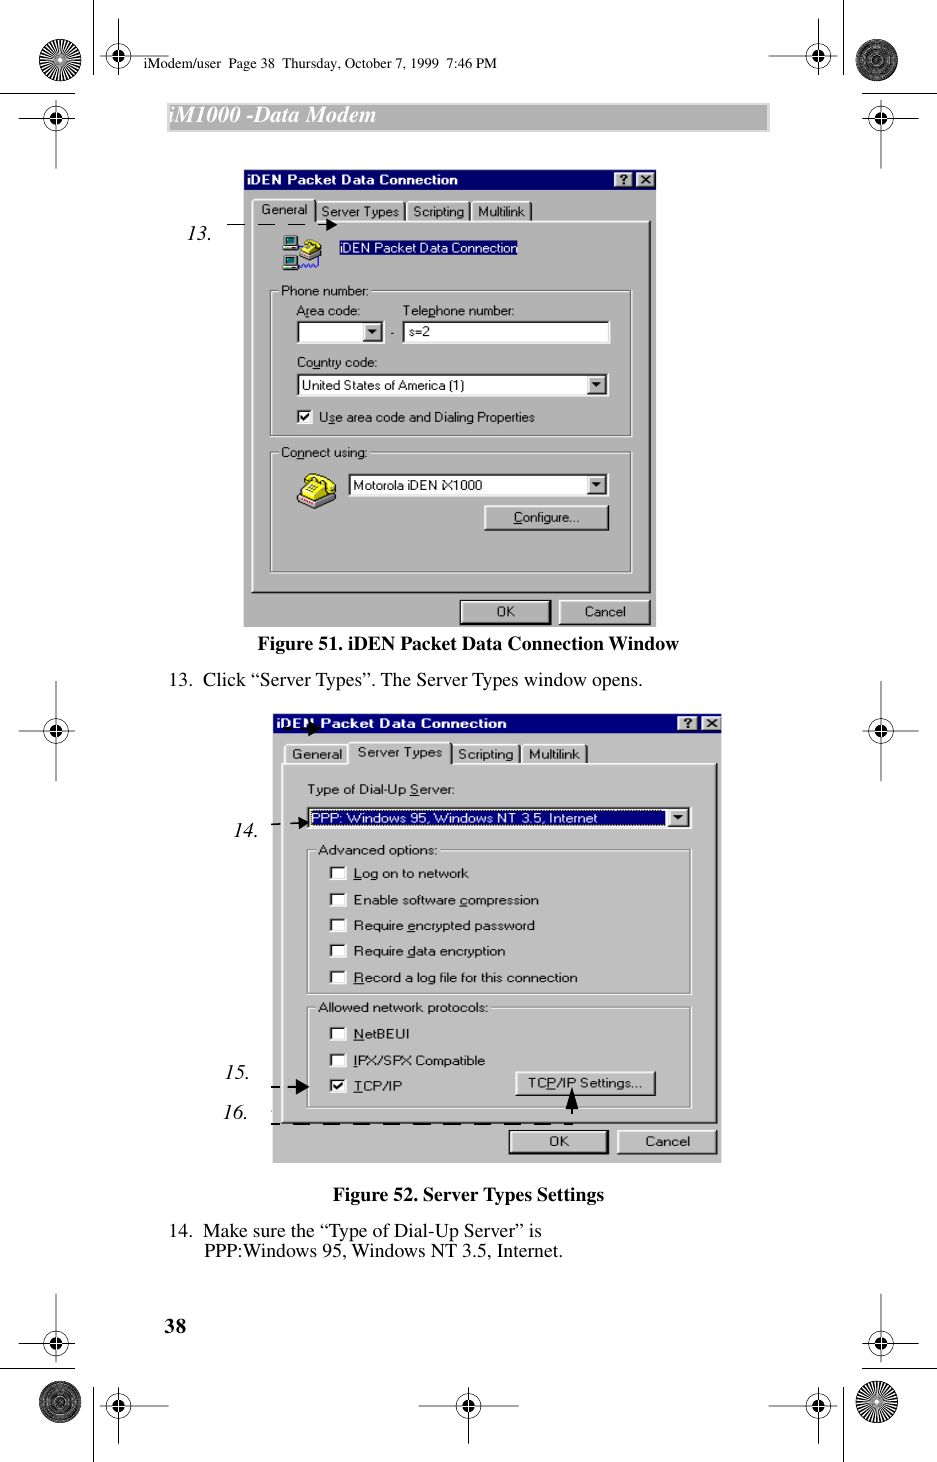 38iM1000 -Data Modem  Figure 51. iDEN Packet Data Connection Window13.  Click “Server Types”. The Server Types window opens. Figure 52. Server Types Settings14.  Make sure the “Type of Dial-Up Server” is PPP:Windows 95, Windows NT 3.5, Internet.13.15.16.  14.iModem/user  Page 38  Thursday, October 7, 1999  7:46 PM